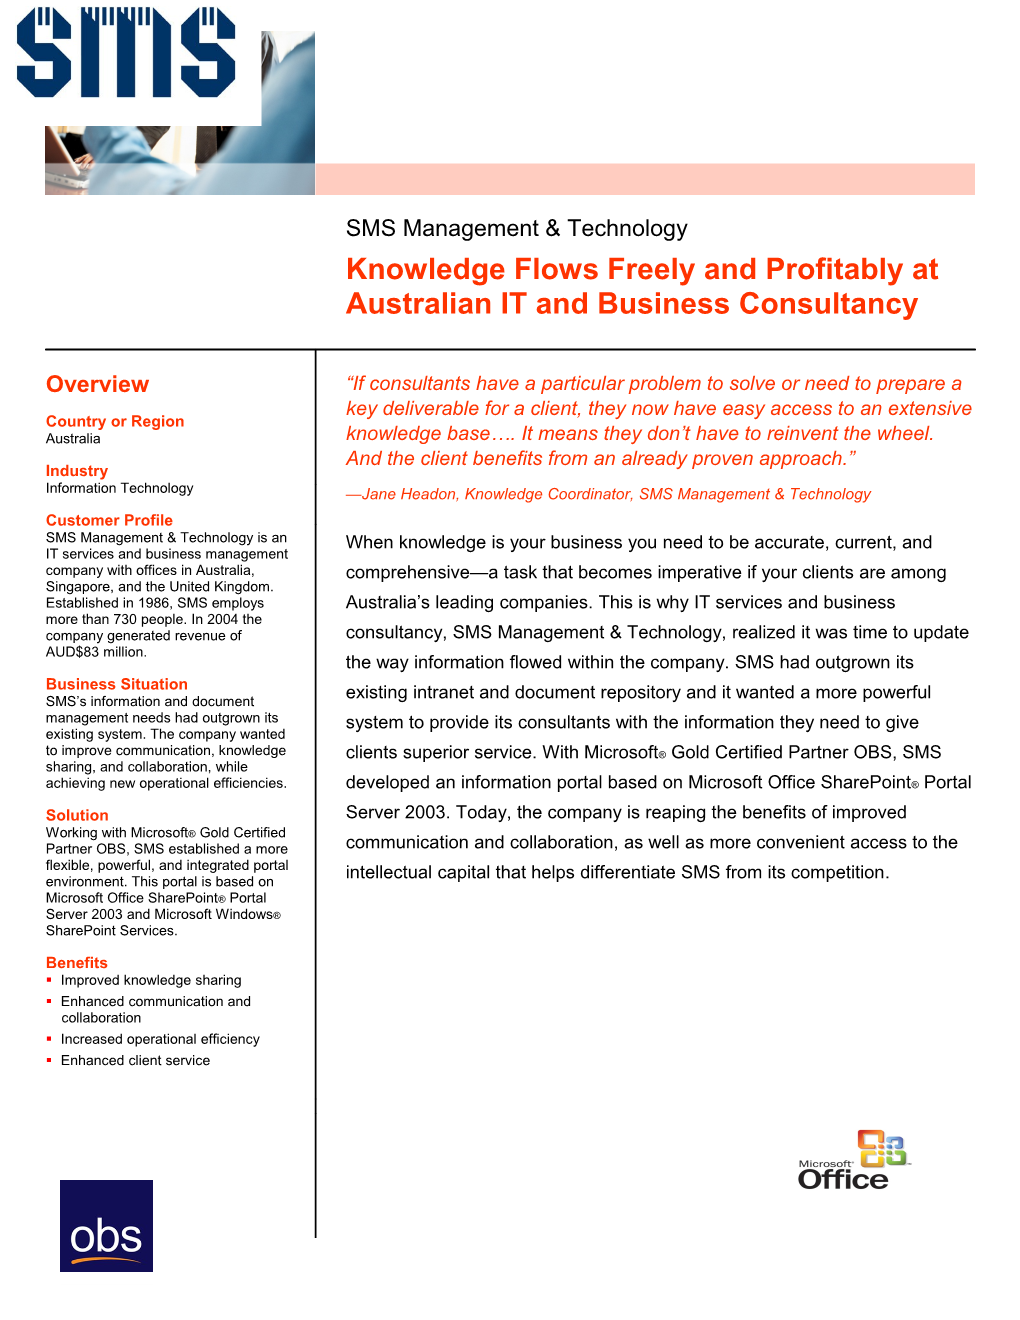 Knowledge Flows Freely and Profitably at Australian IT and Business Consultancy